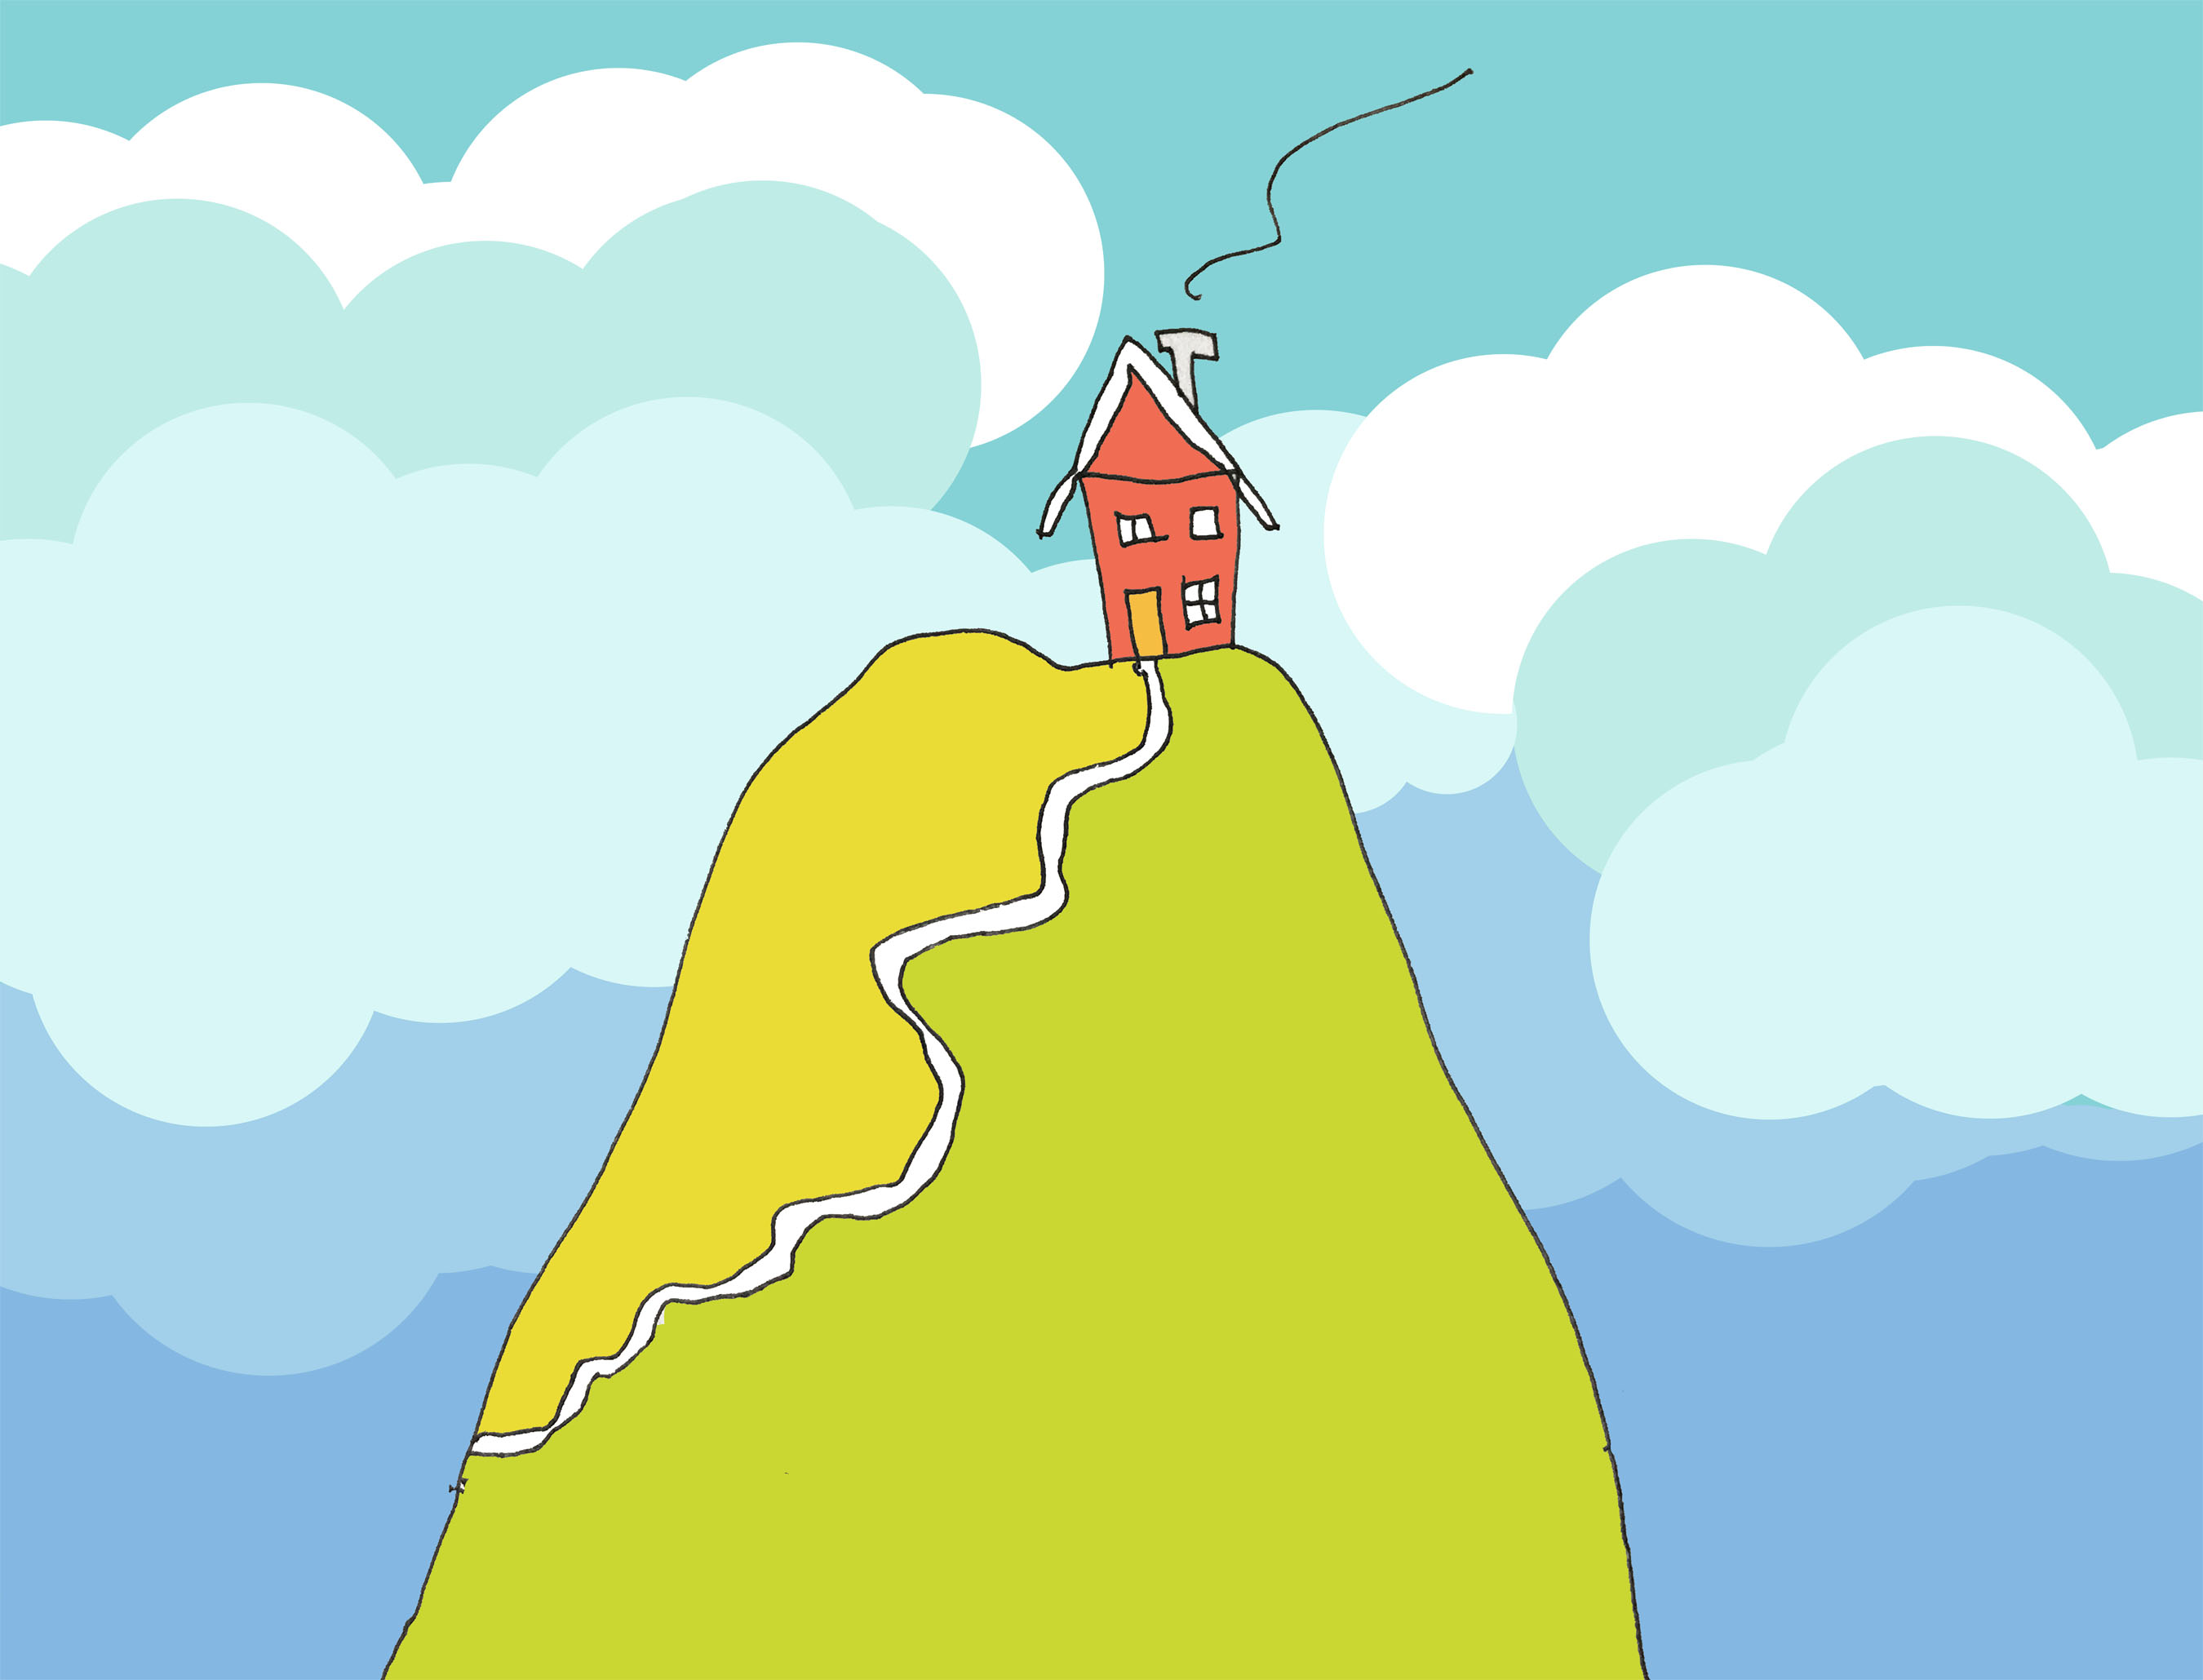 art every day number 463 house on a hill hideaway illustration